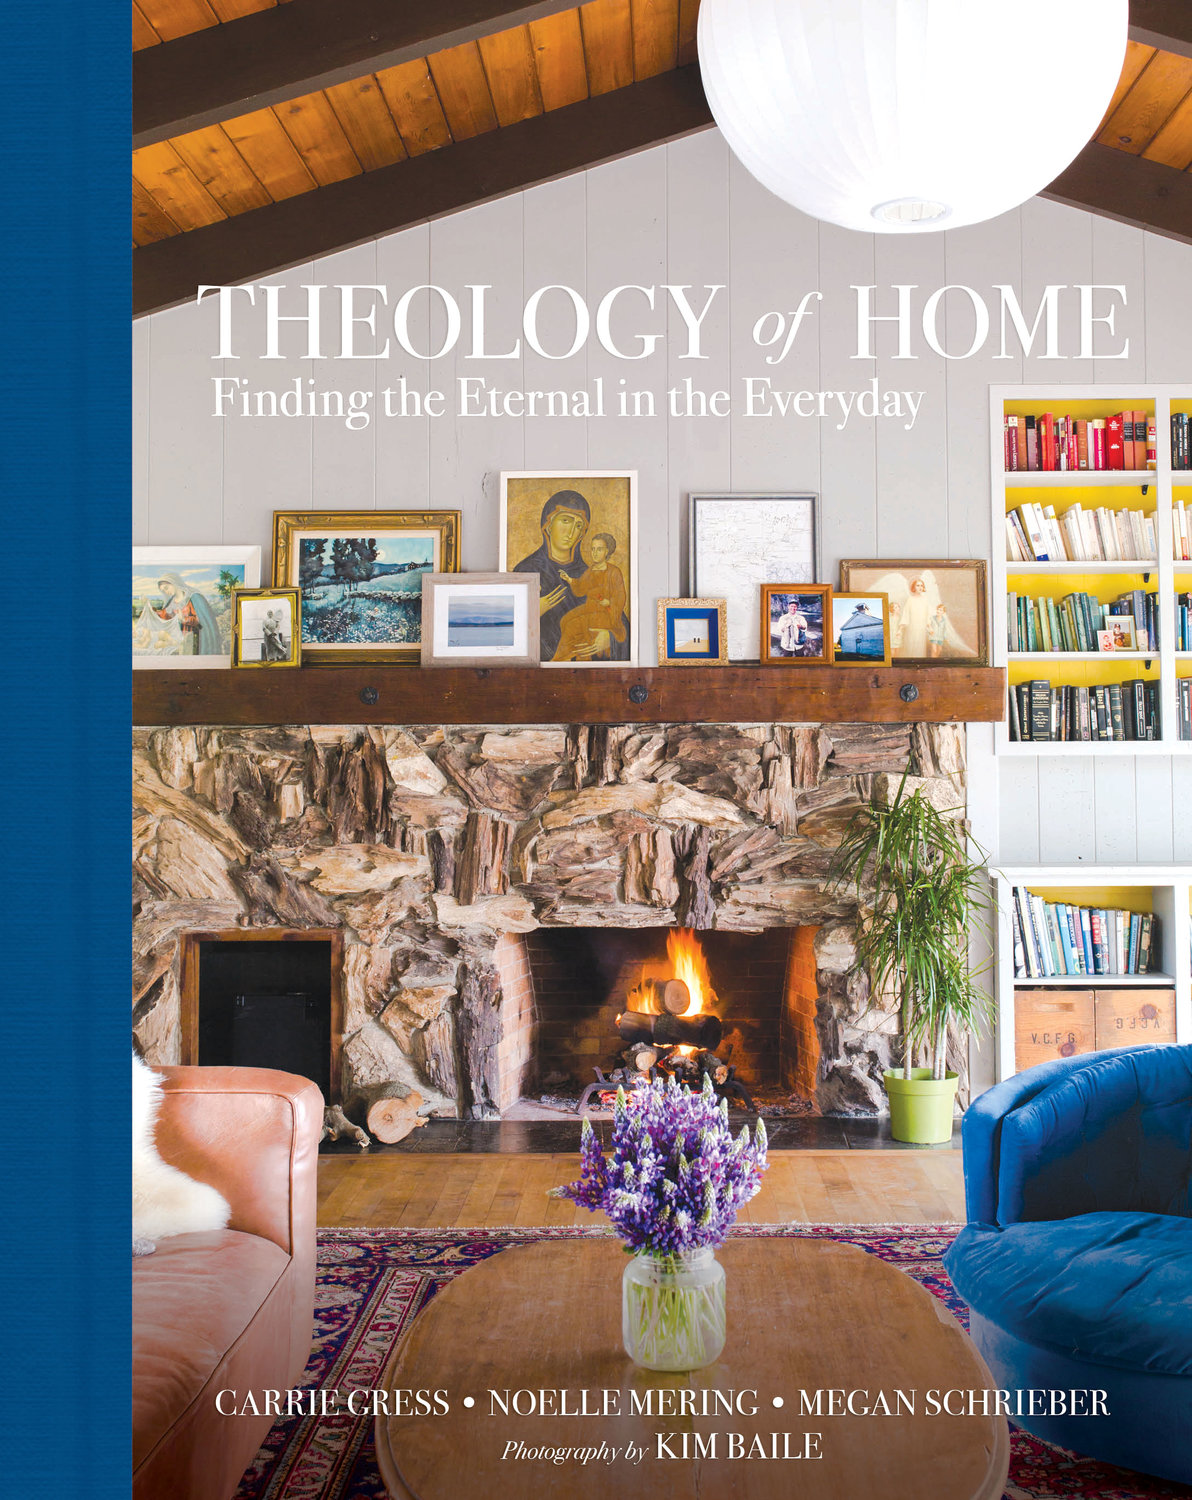 UPLIFTING IMAGES—The recently published book, “Theology of Home: Finding the Eternal in the Everyday,” is aimed at Catholic women and features more than 100 professional photographs of their homes across the country.